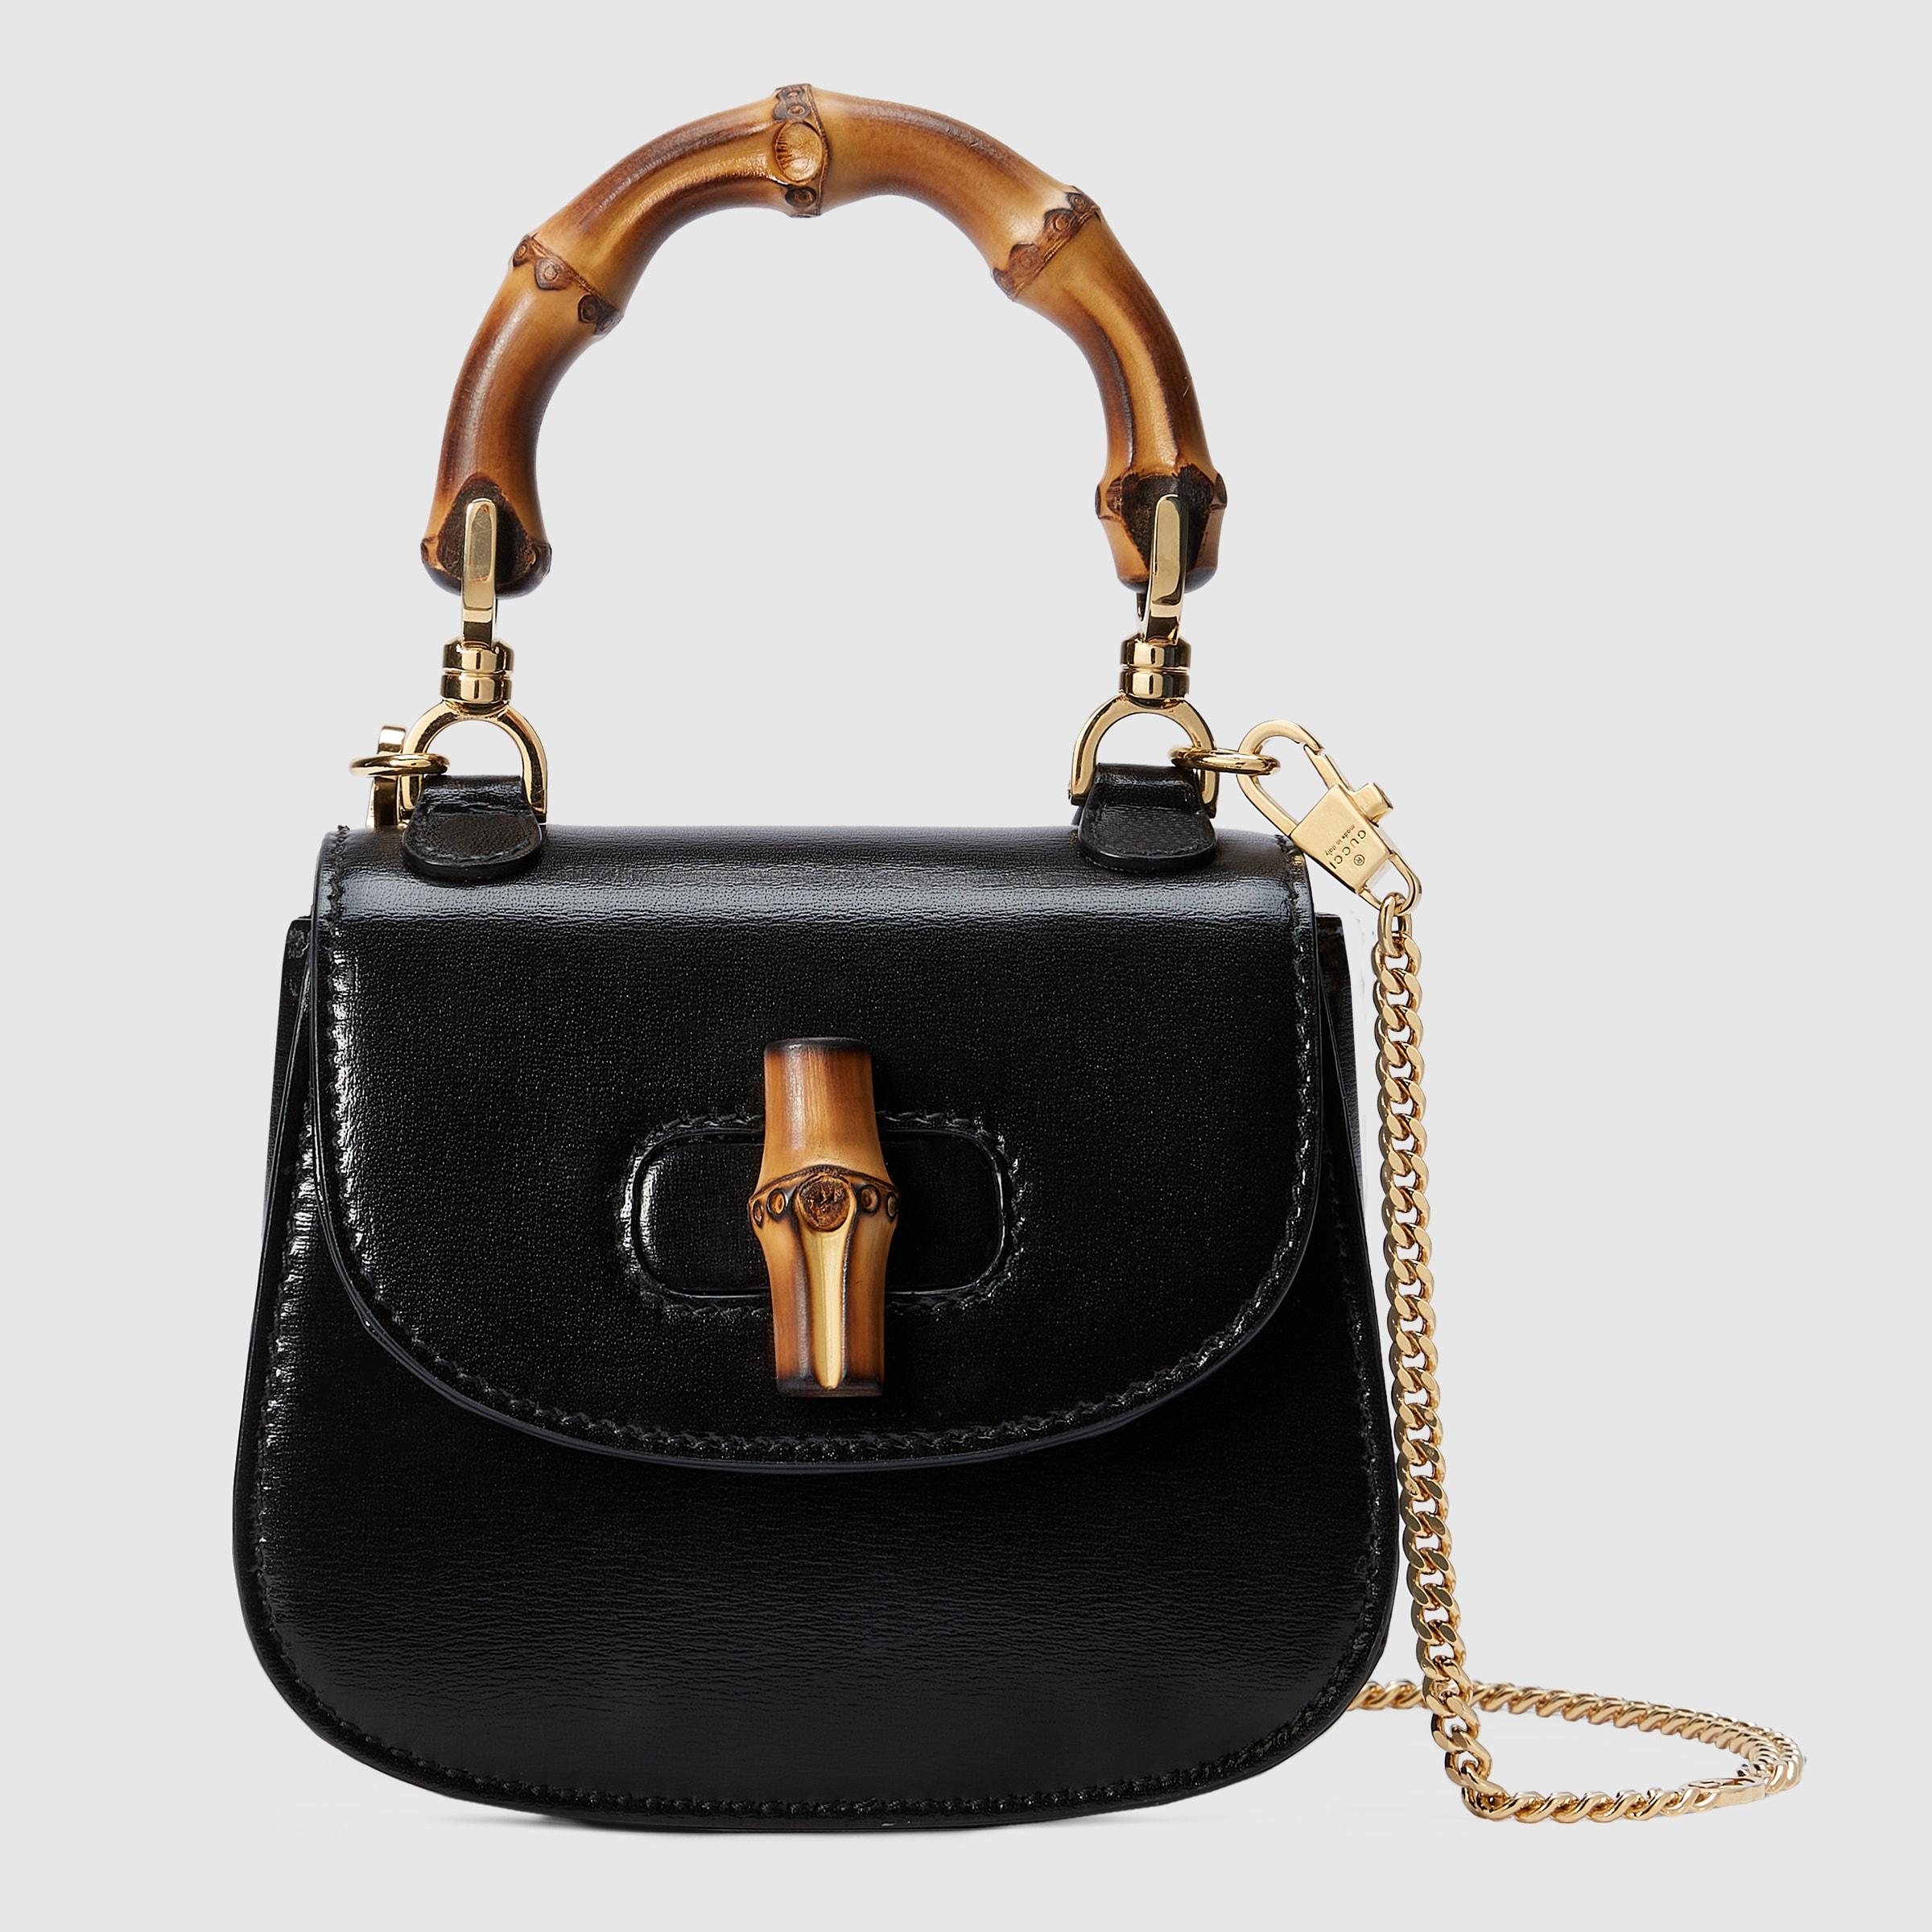 Gucci Bamboo 1947 mini top handle bag in black patent leather